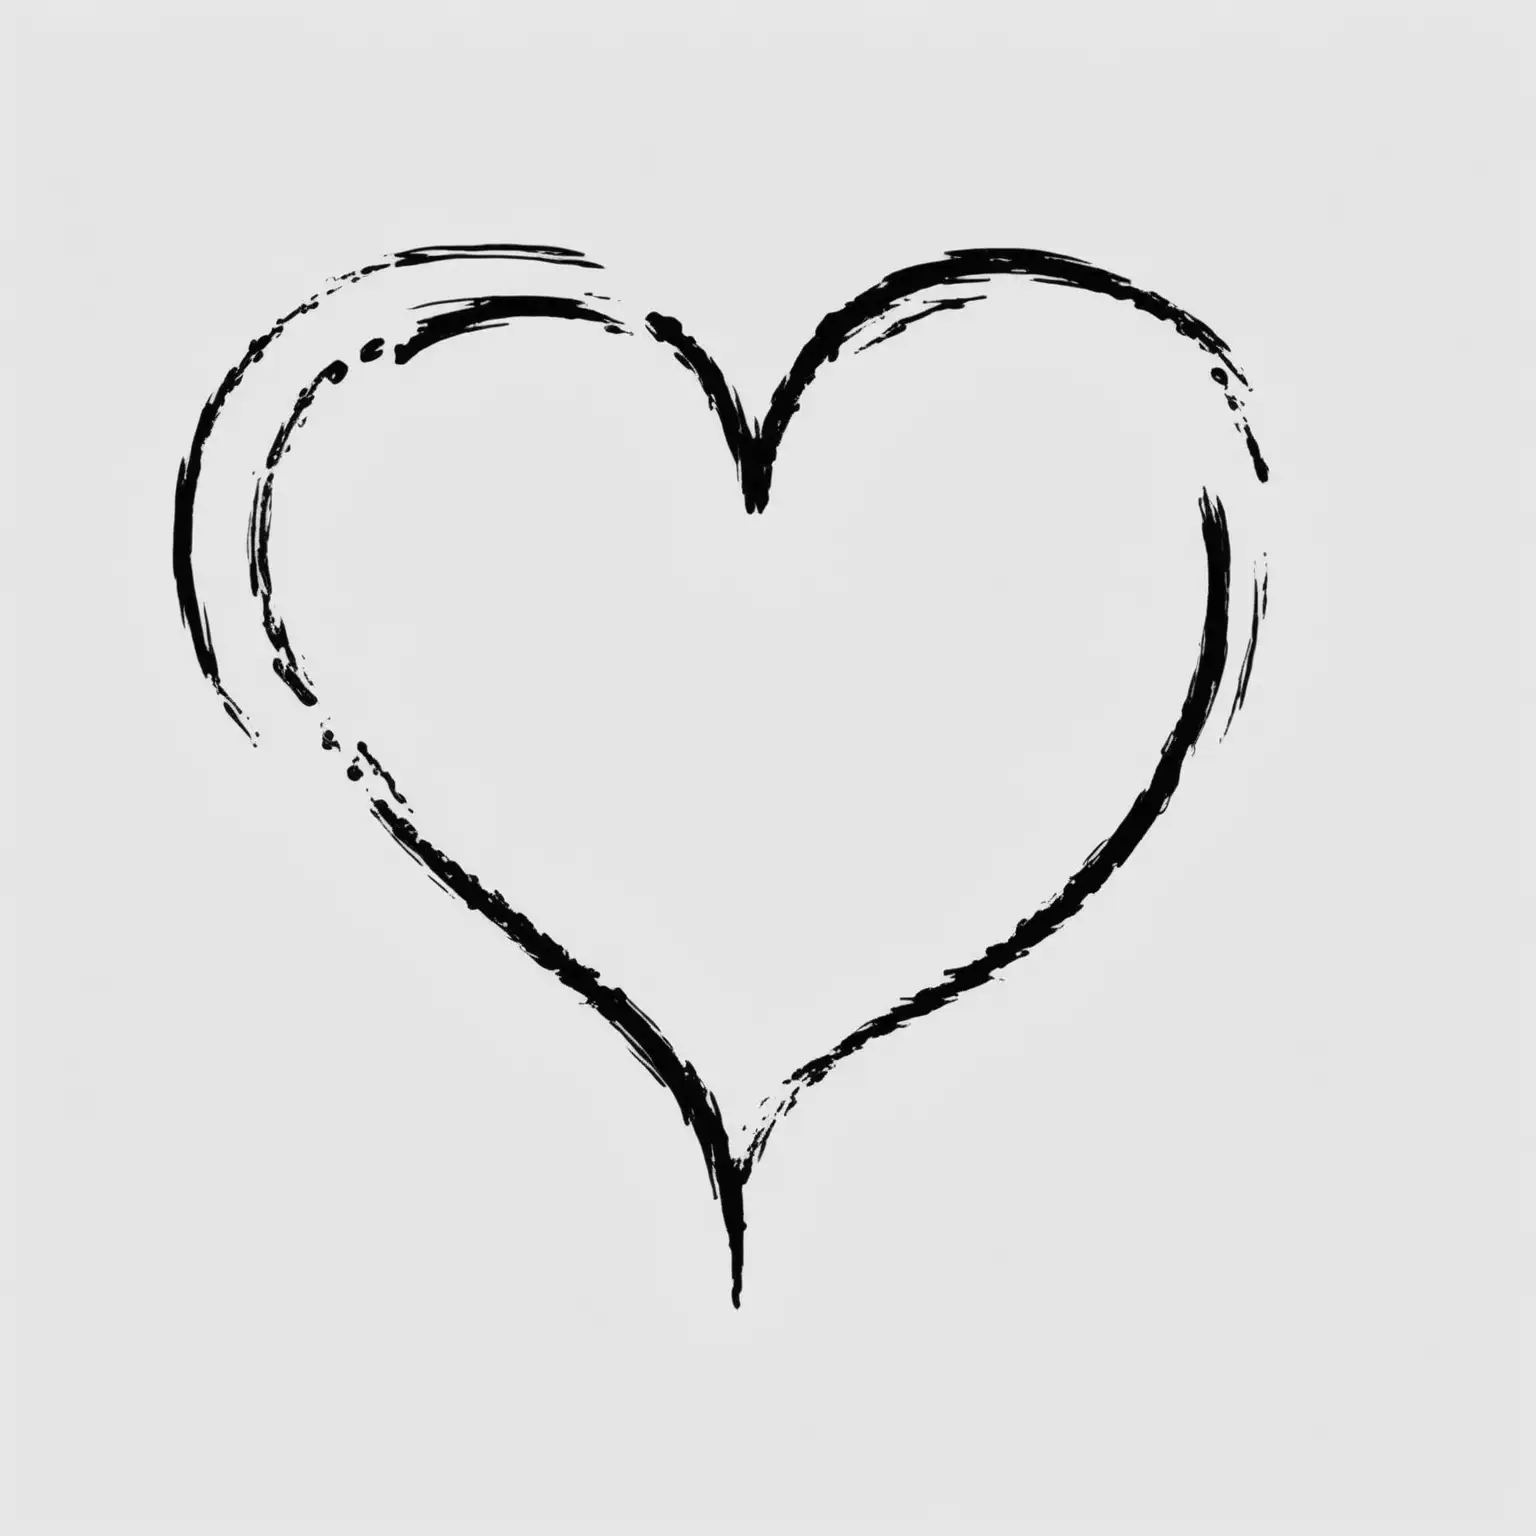 Heart Clipart Simple Black Outline on White Background